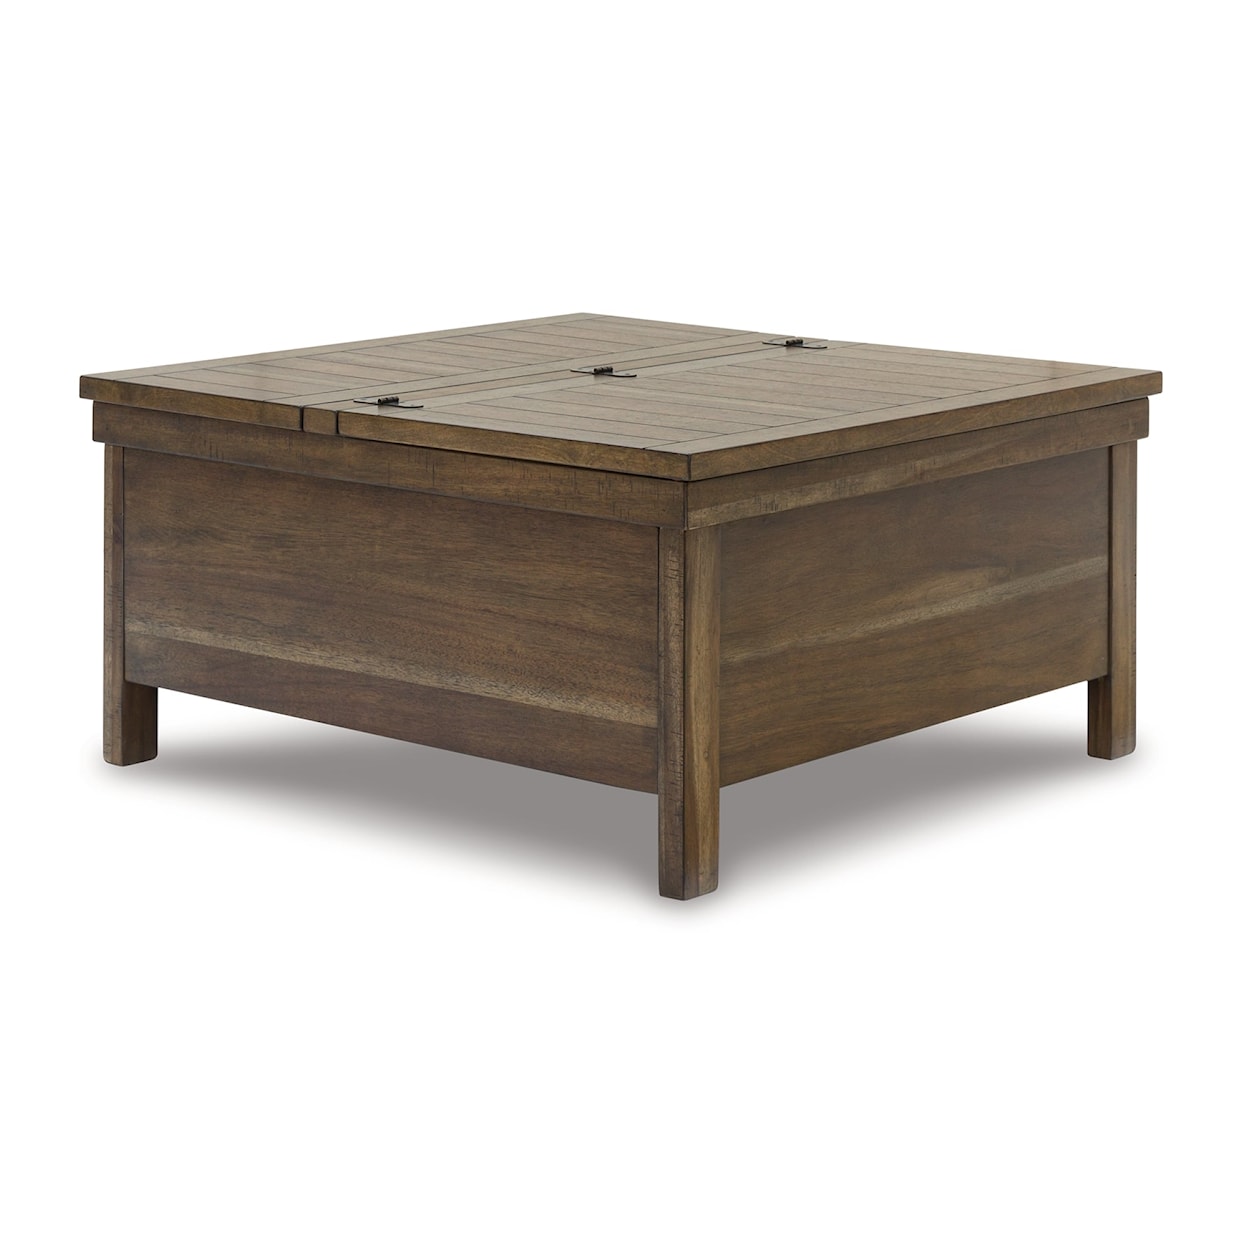 Benchcraft Moriville Lift Top Cocktail Table